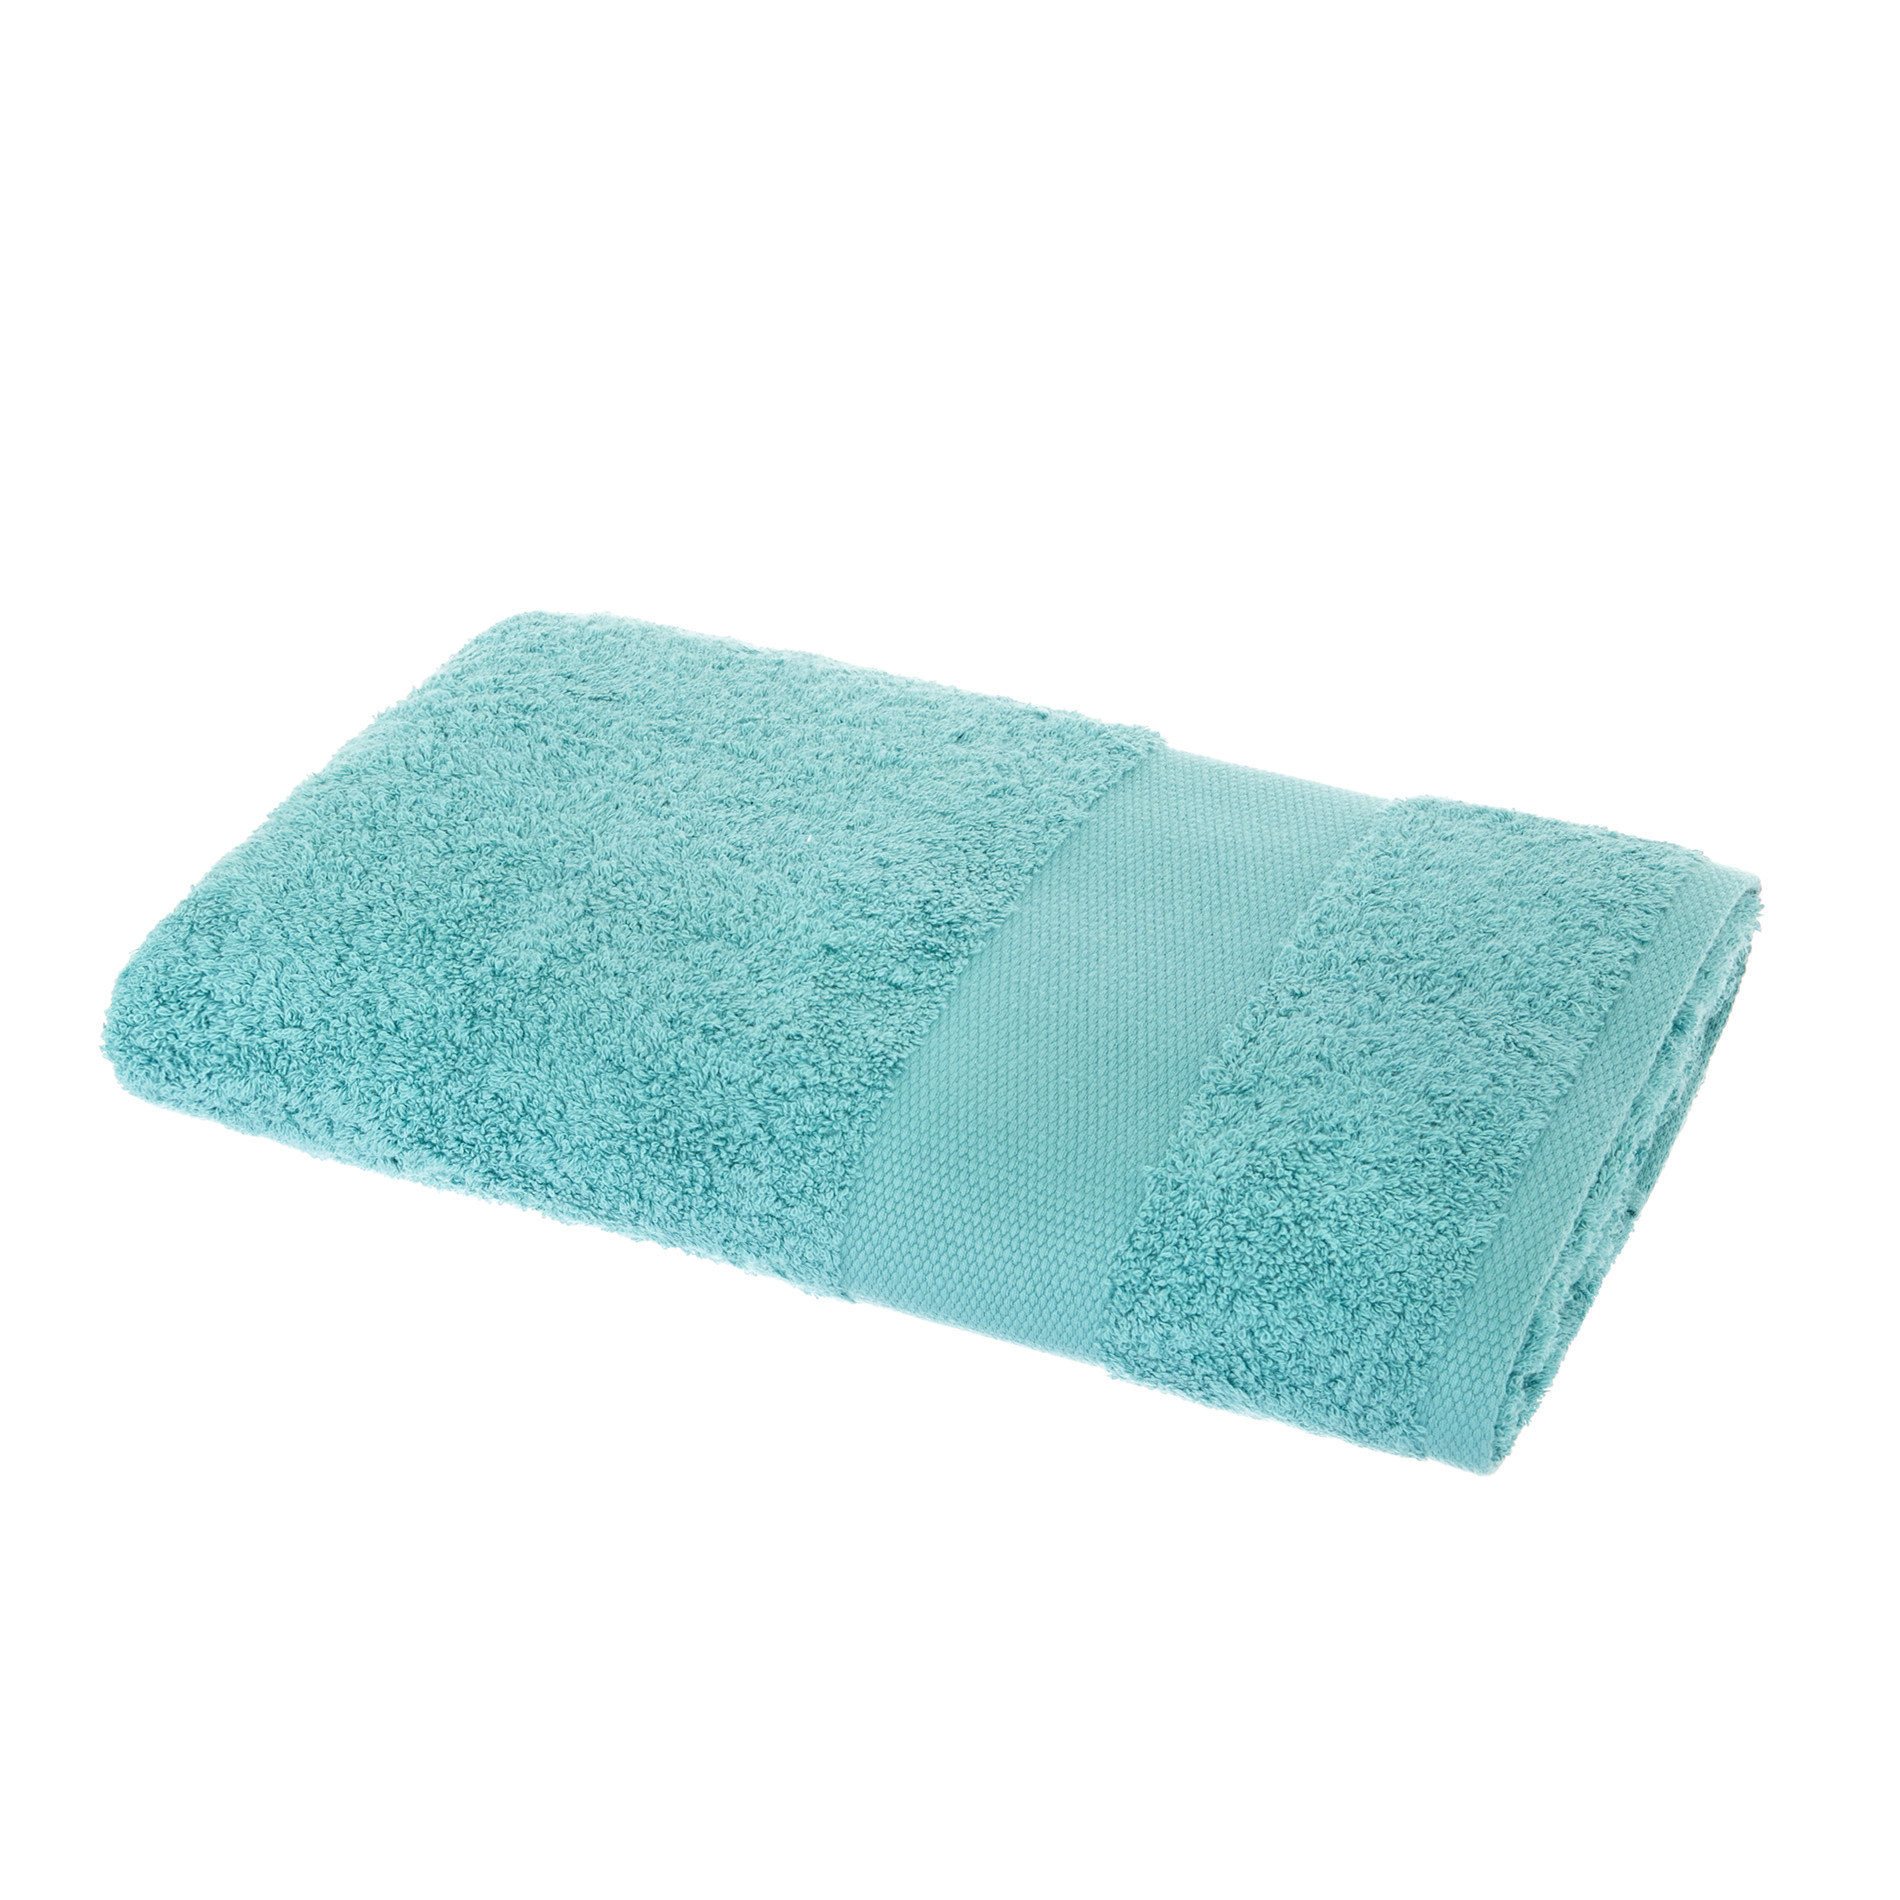 Zefiro pure cotton terry towel, Teal, large image number 1